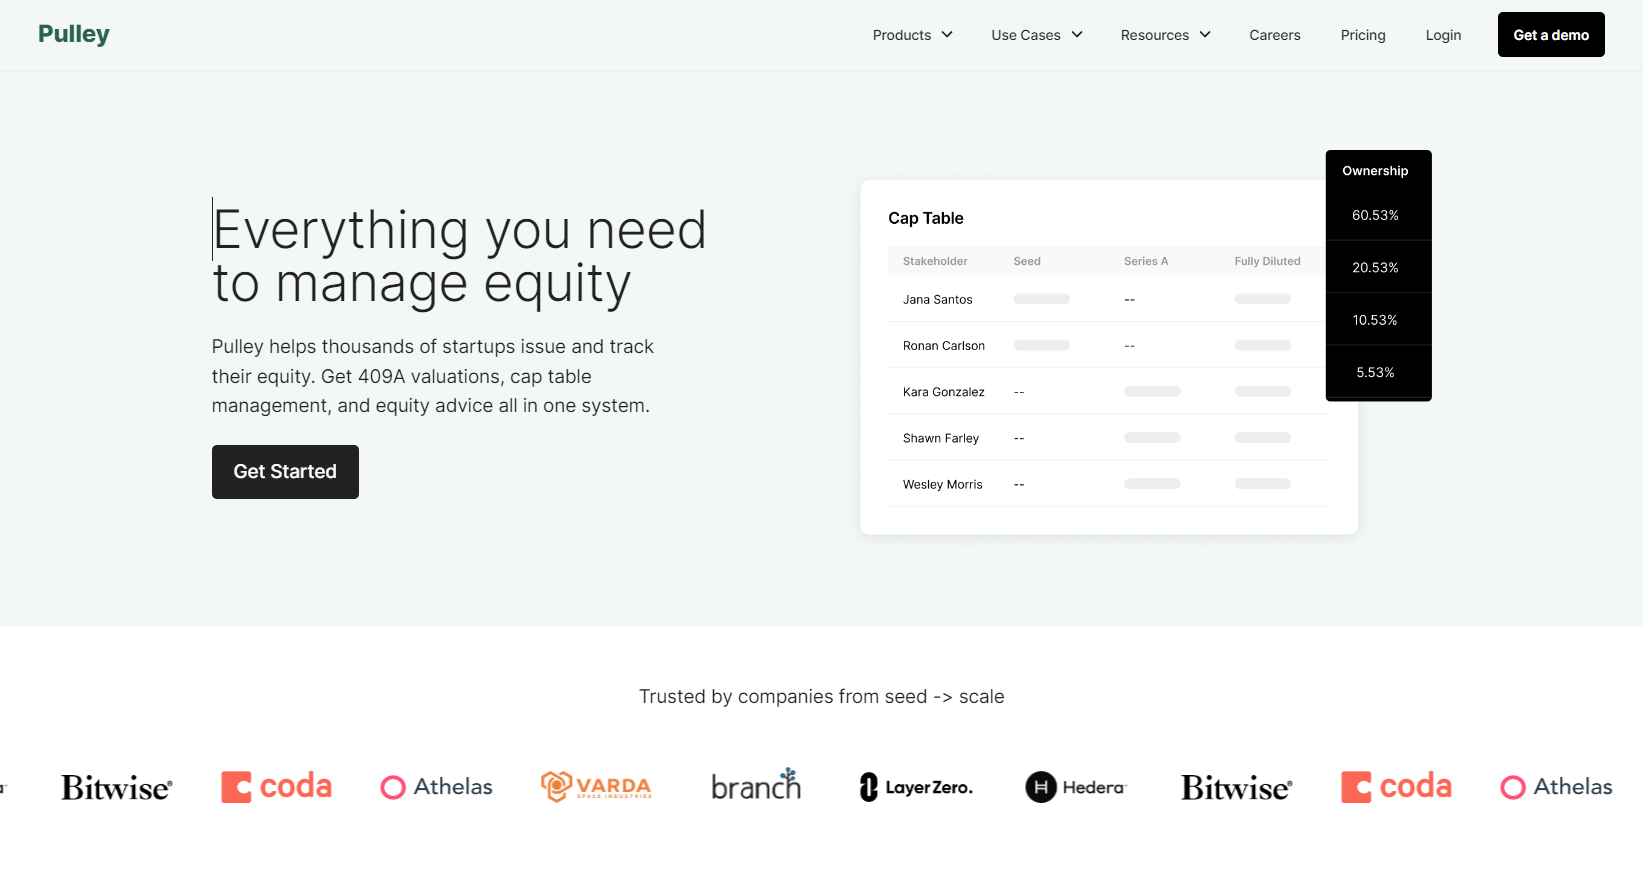 Image alt: Pulley is designed to help startups manage their equity.